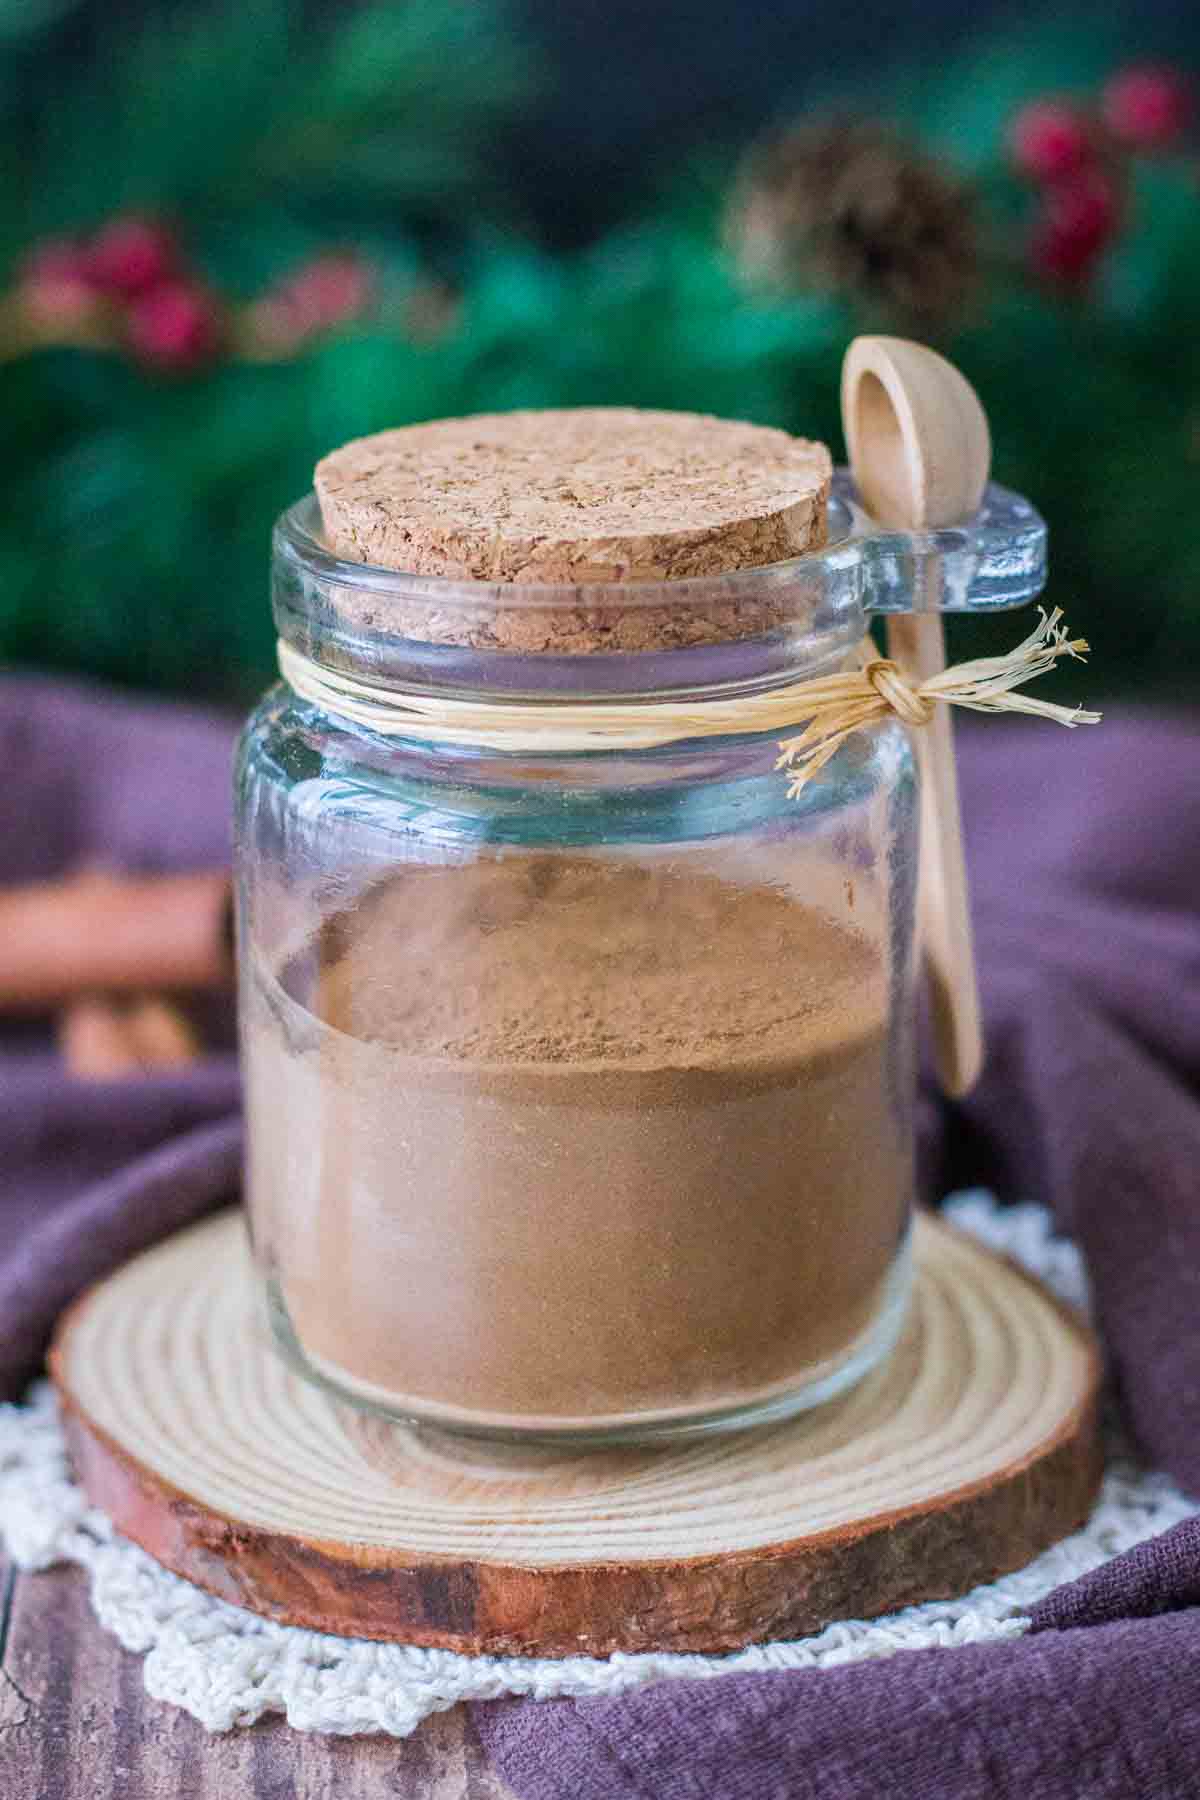 Homemade Gingerbread Spice Mix stored in a glass jar